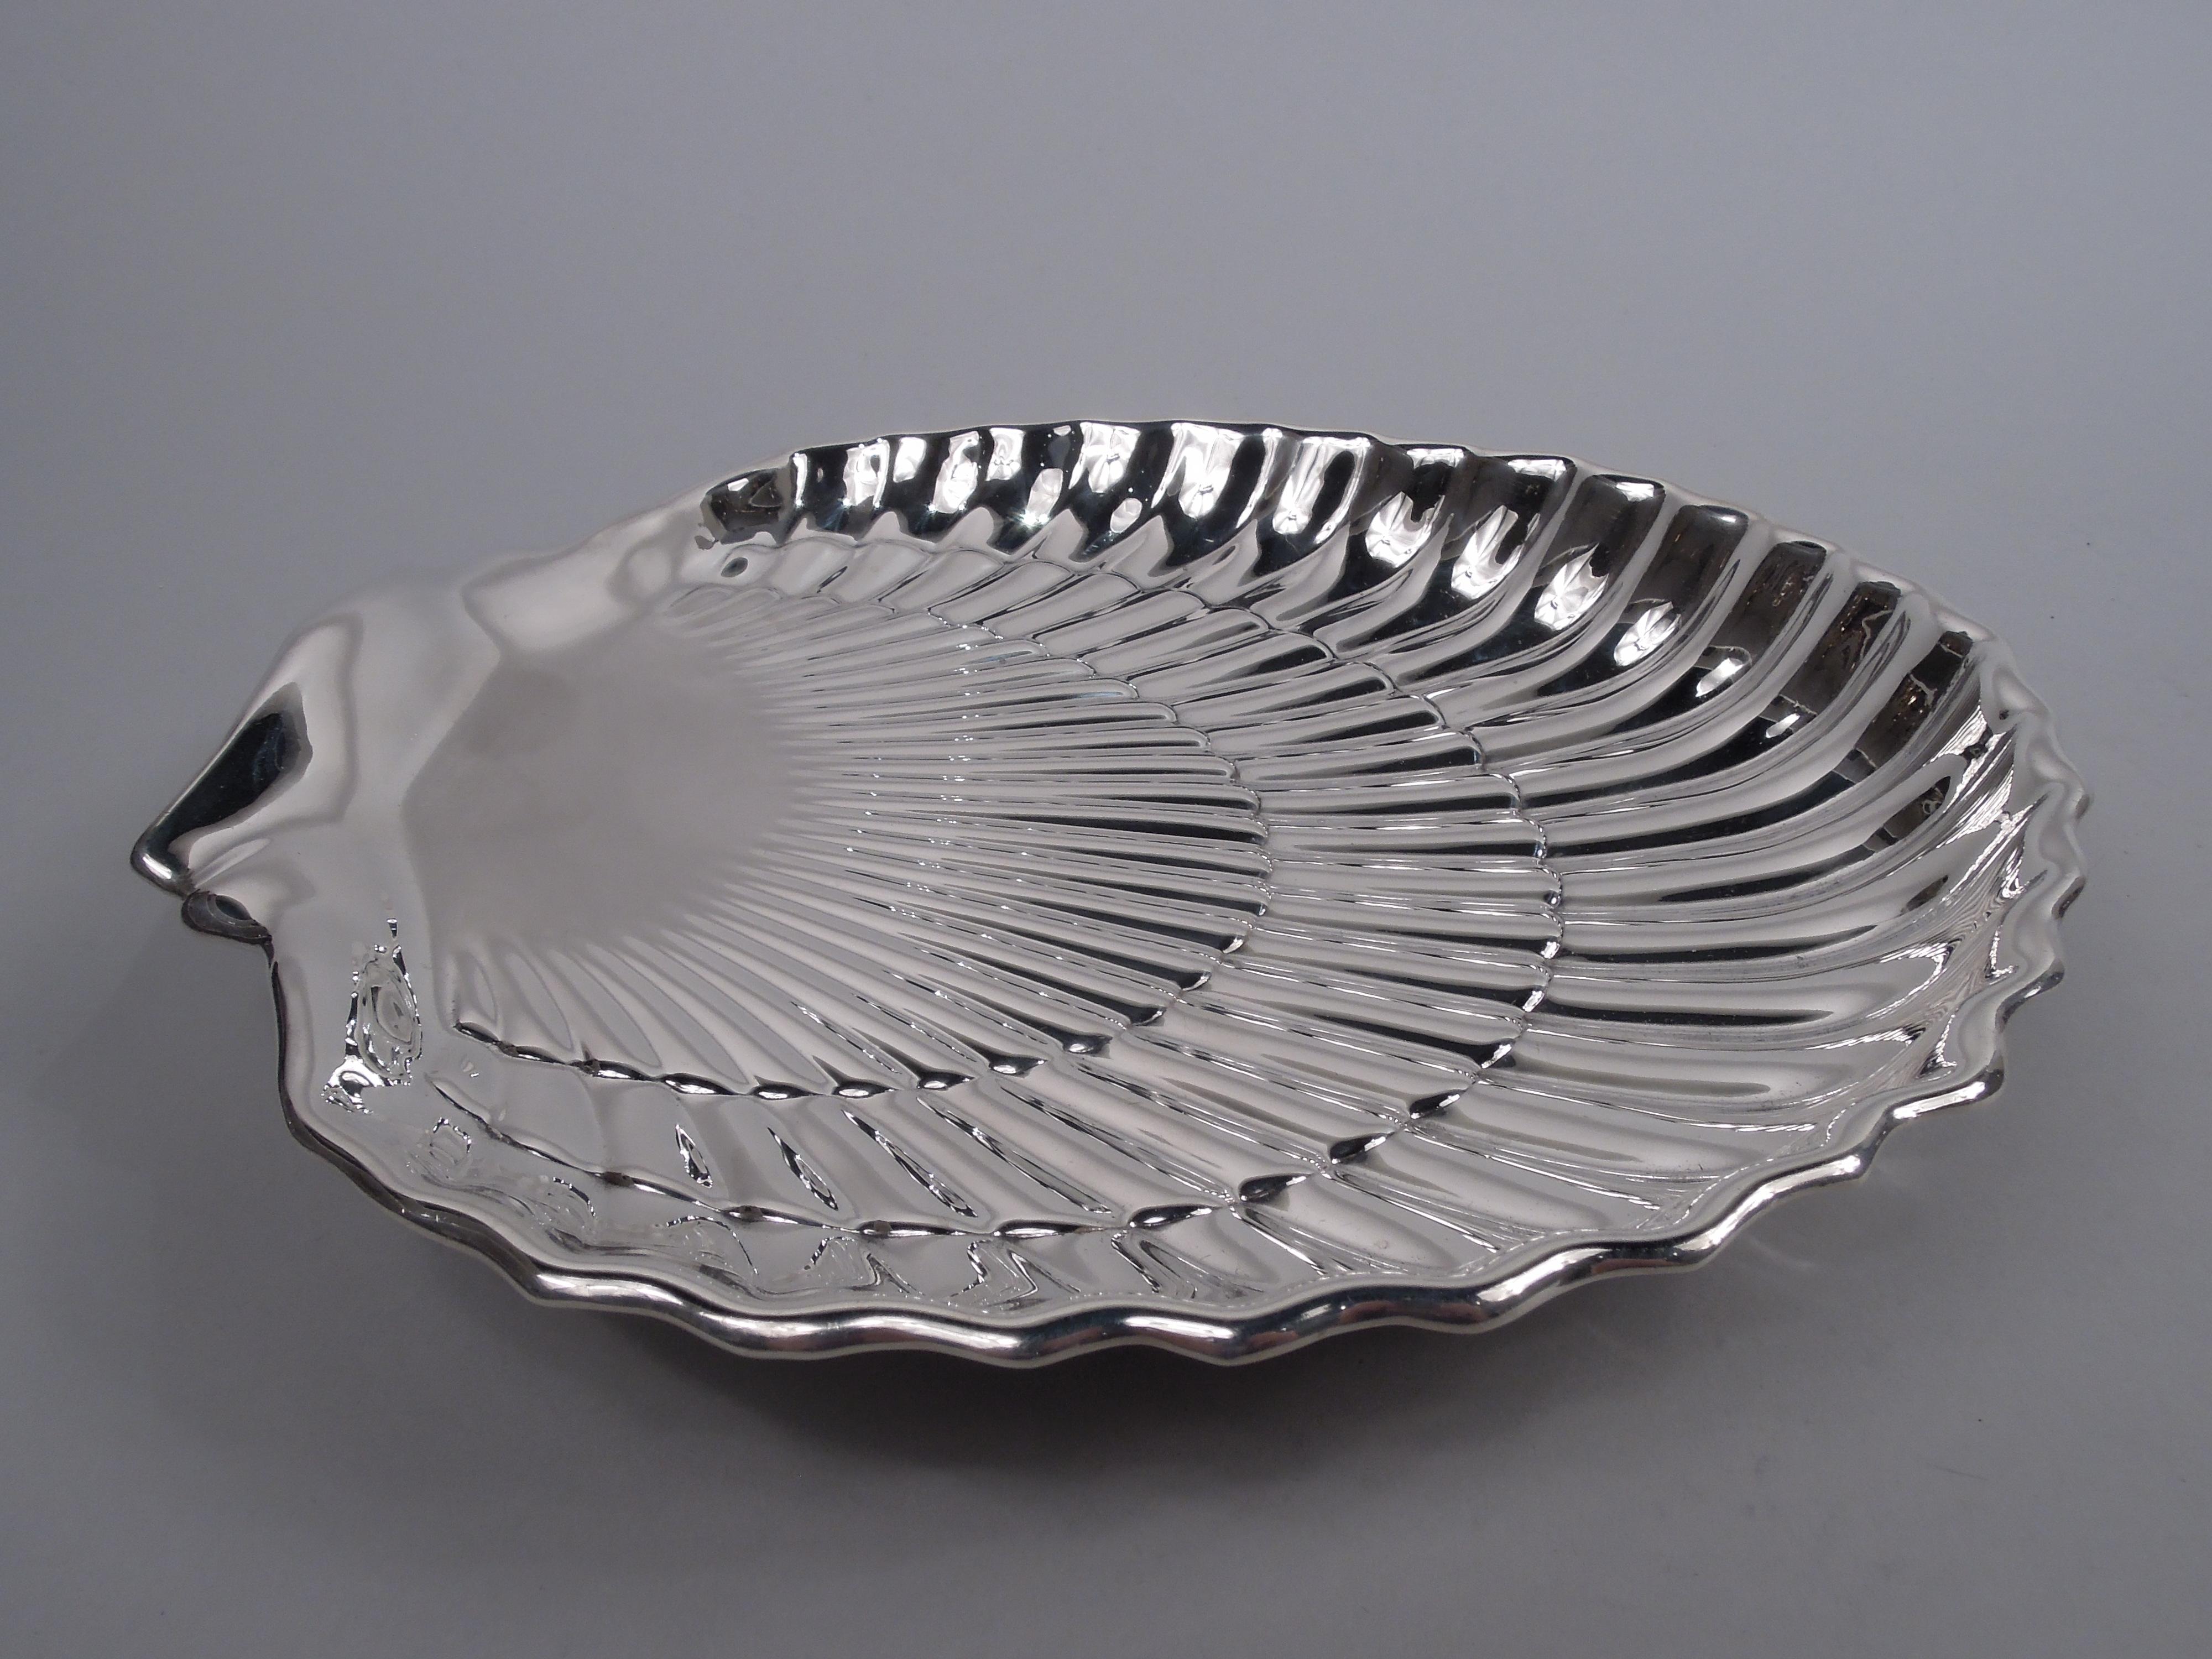 Large Gorham Modern Classical Sterling Silver Scallop Shell Dish, 1947 For Sale 2